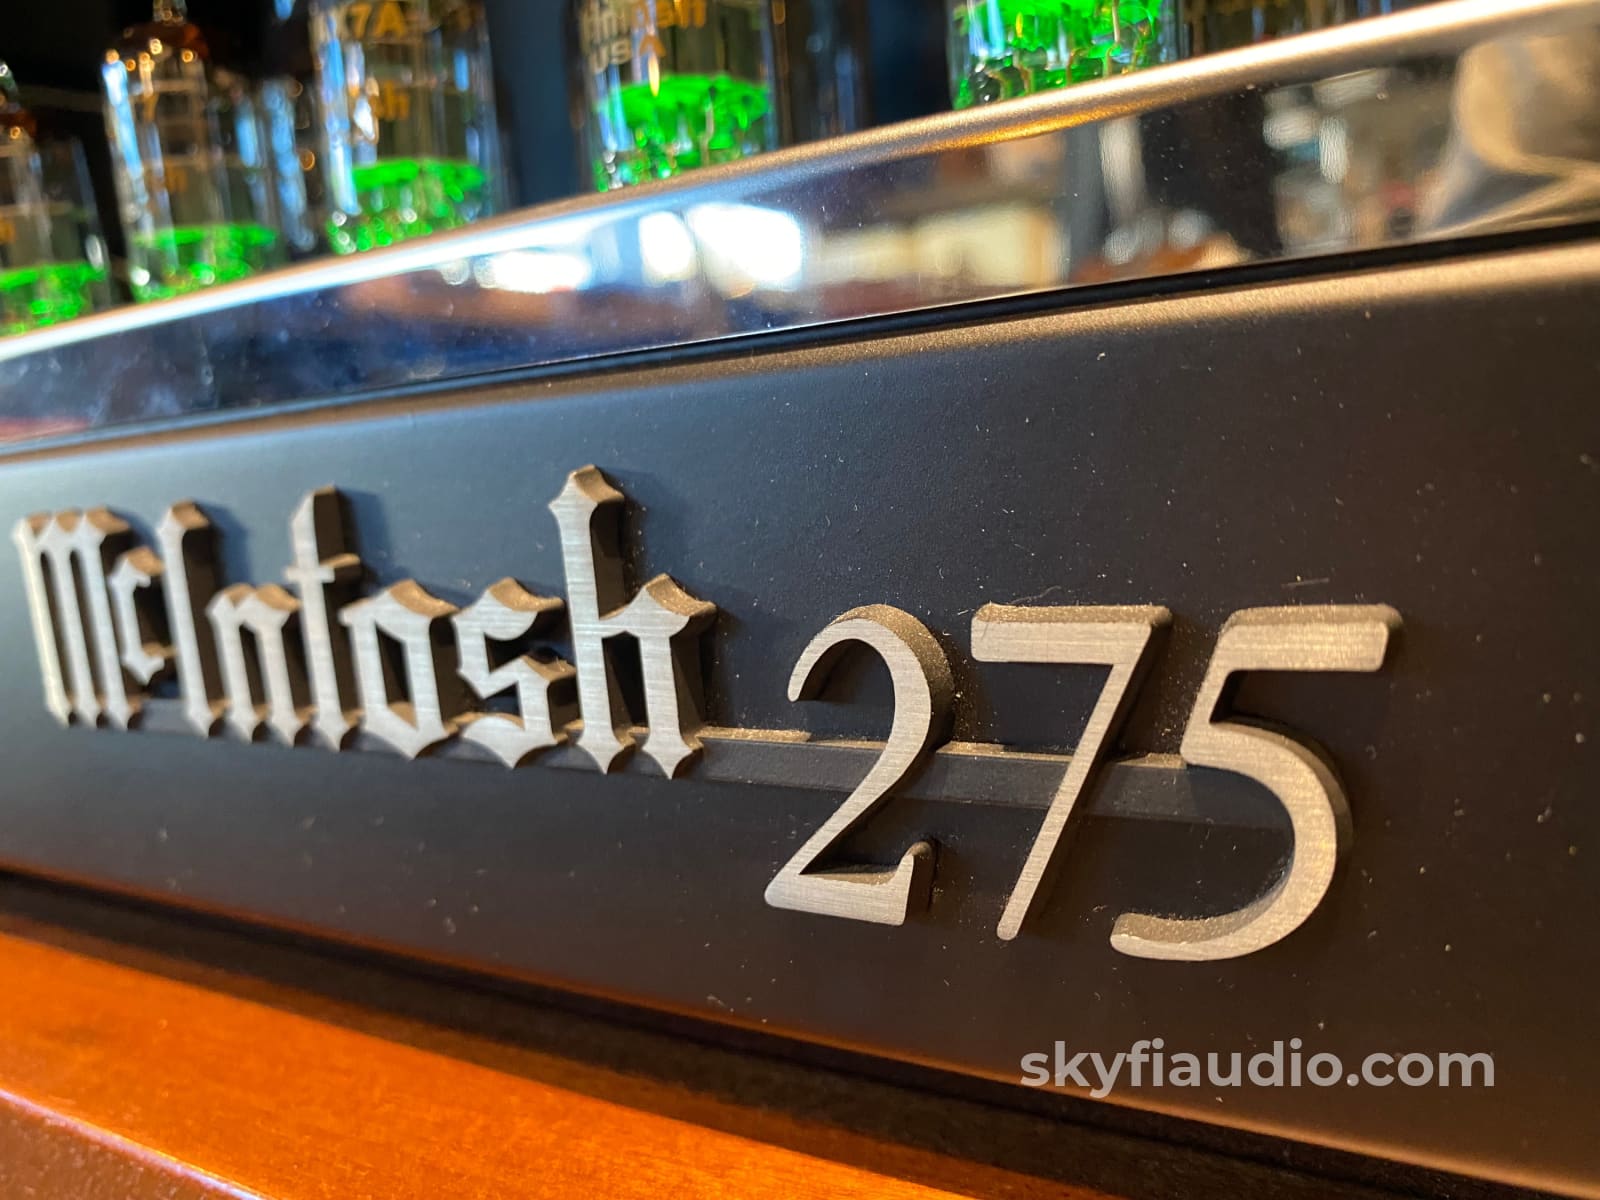 Mcintosh Mc275 - Latest Version Store Display In Only Amplifier